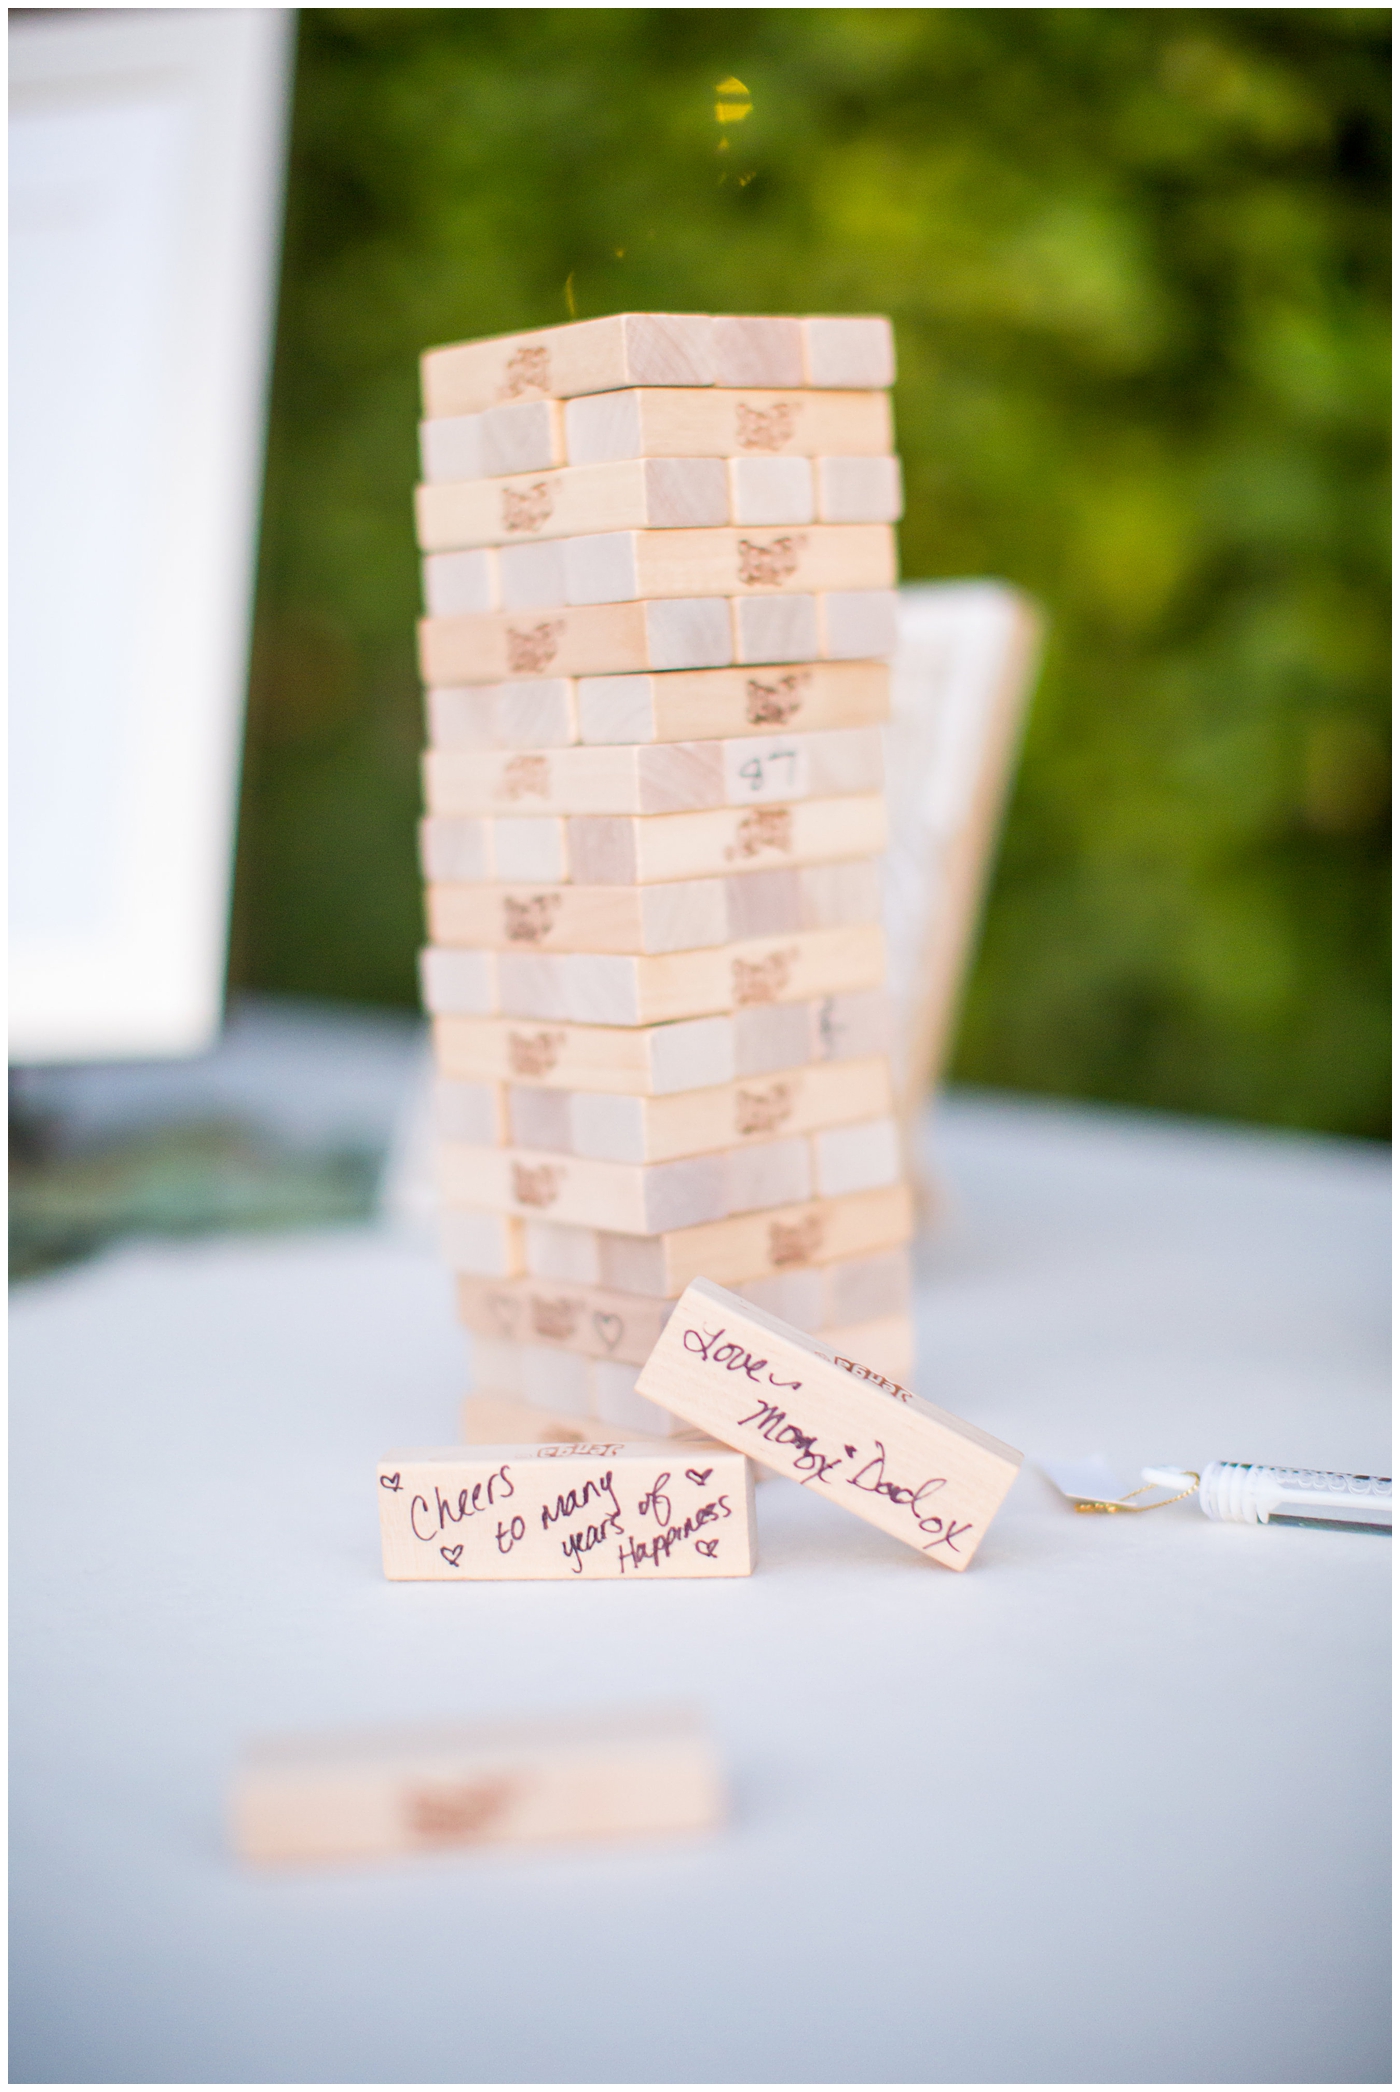 Jenga guest book at wedding reception